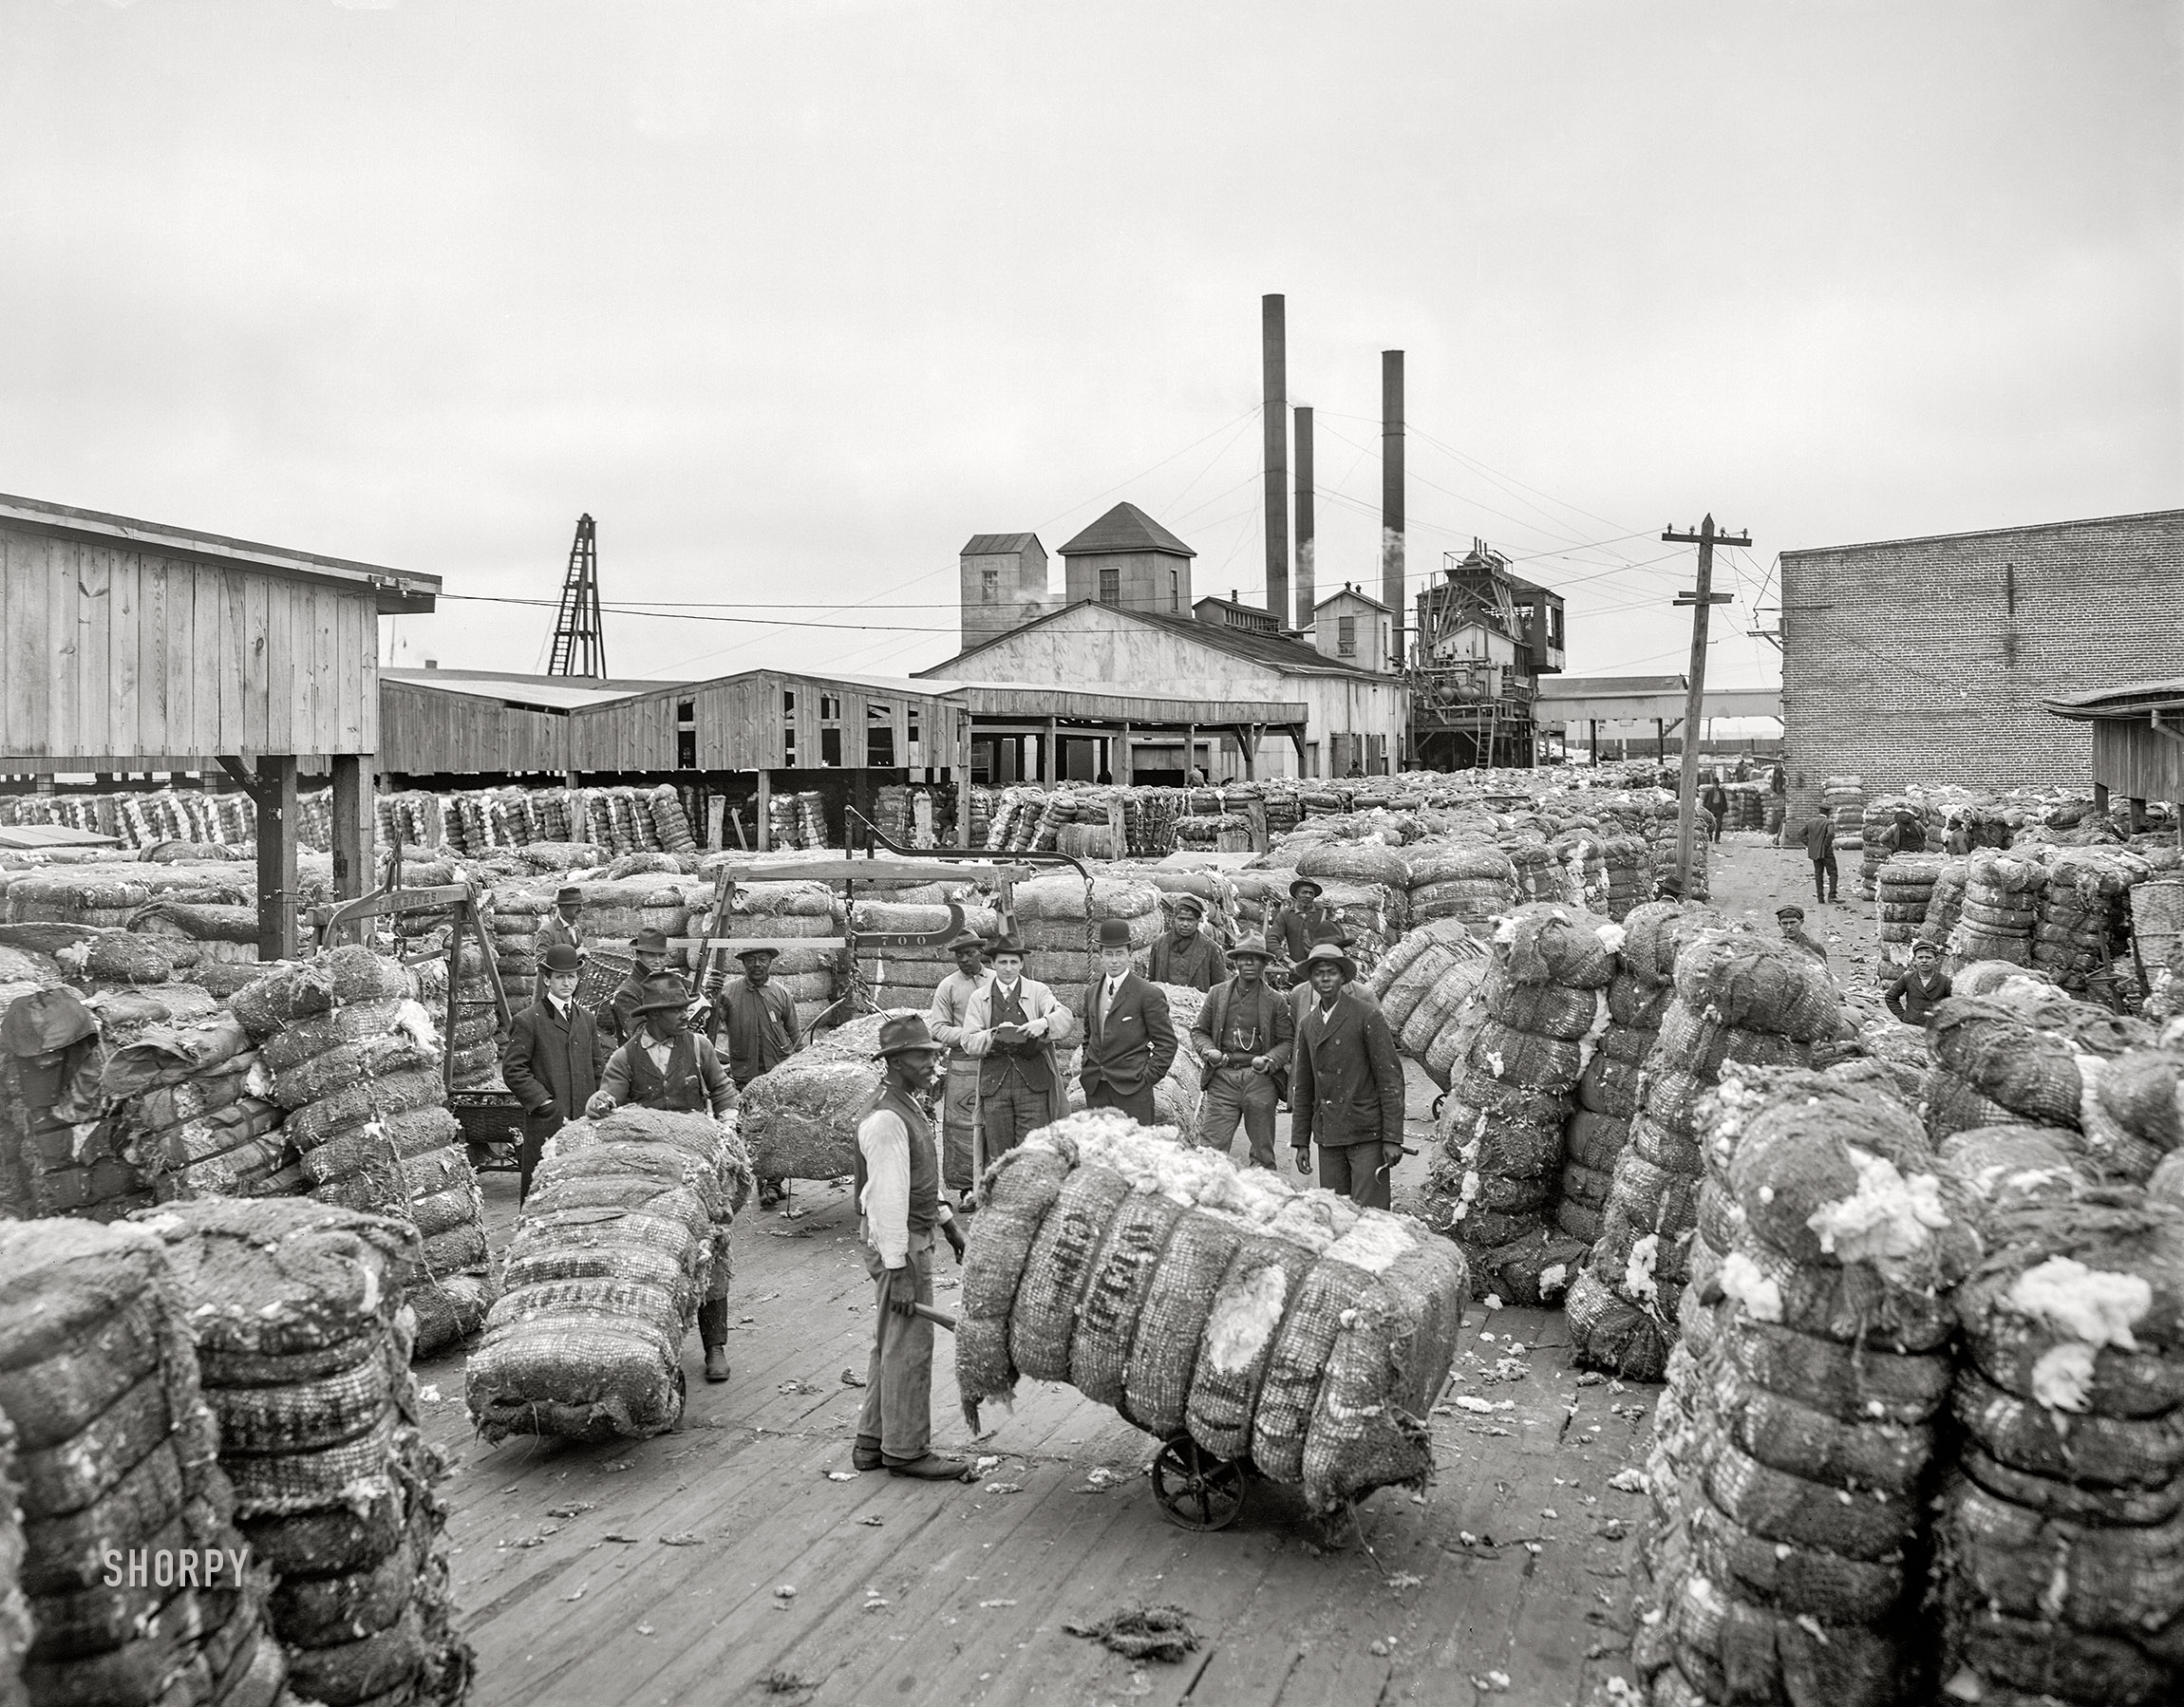 Norfolk, Virginia, circa 1905. "Weighing cotton on the docks." 8x10 inch dry plate glass negative, Detroit Publishing Company. View full size.